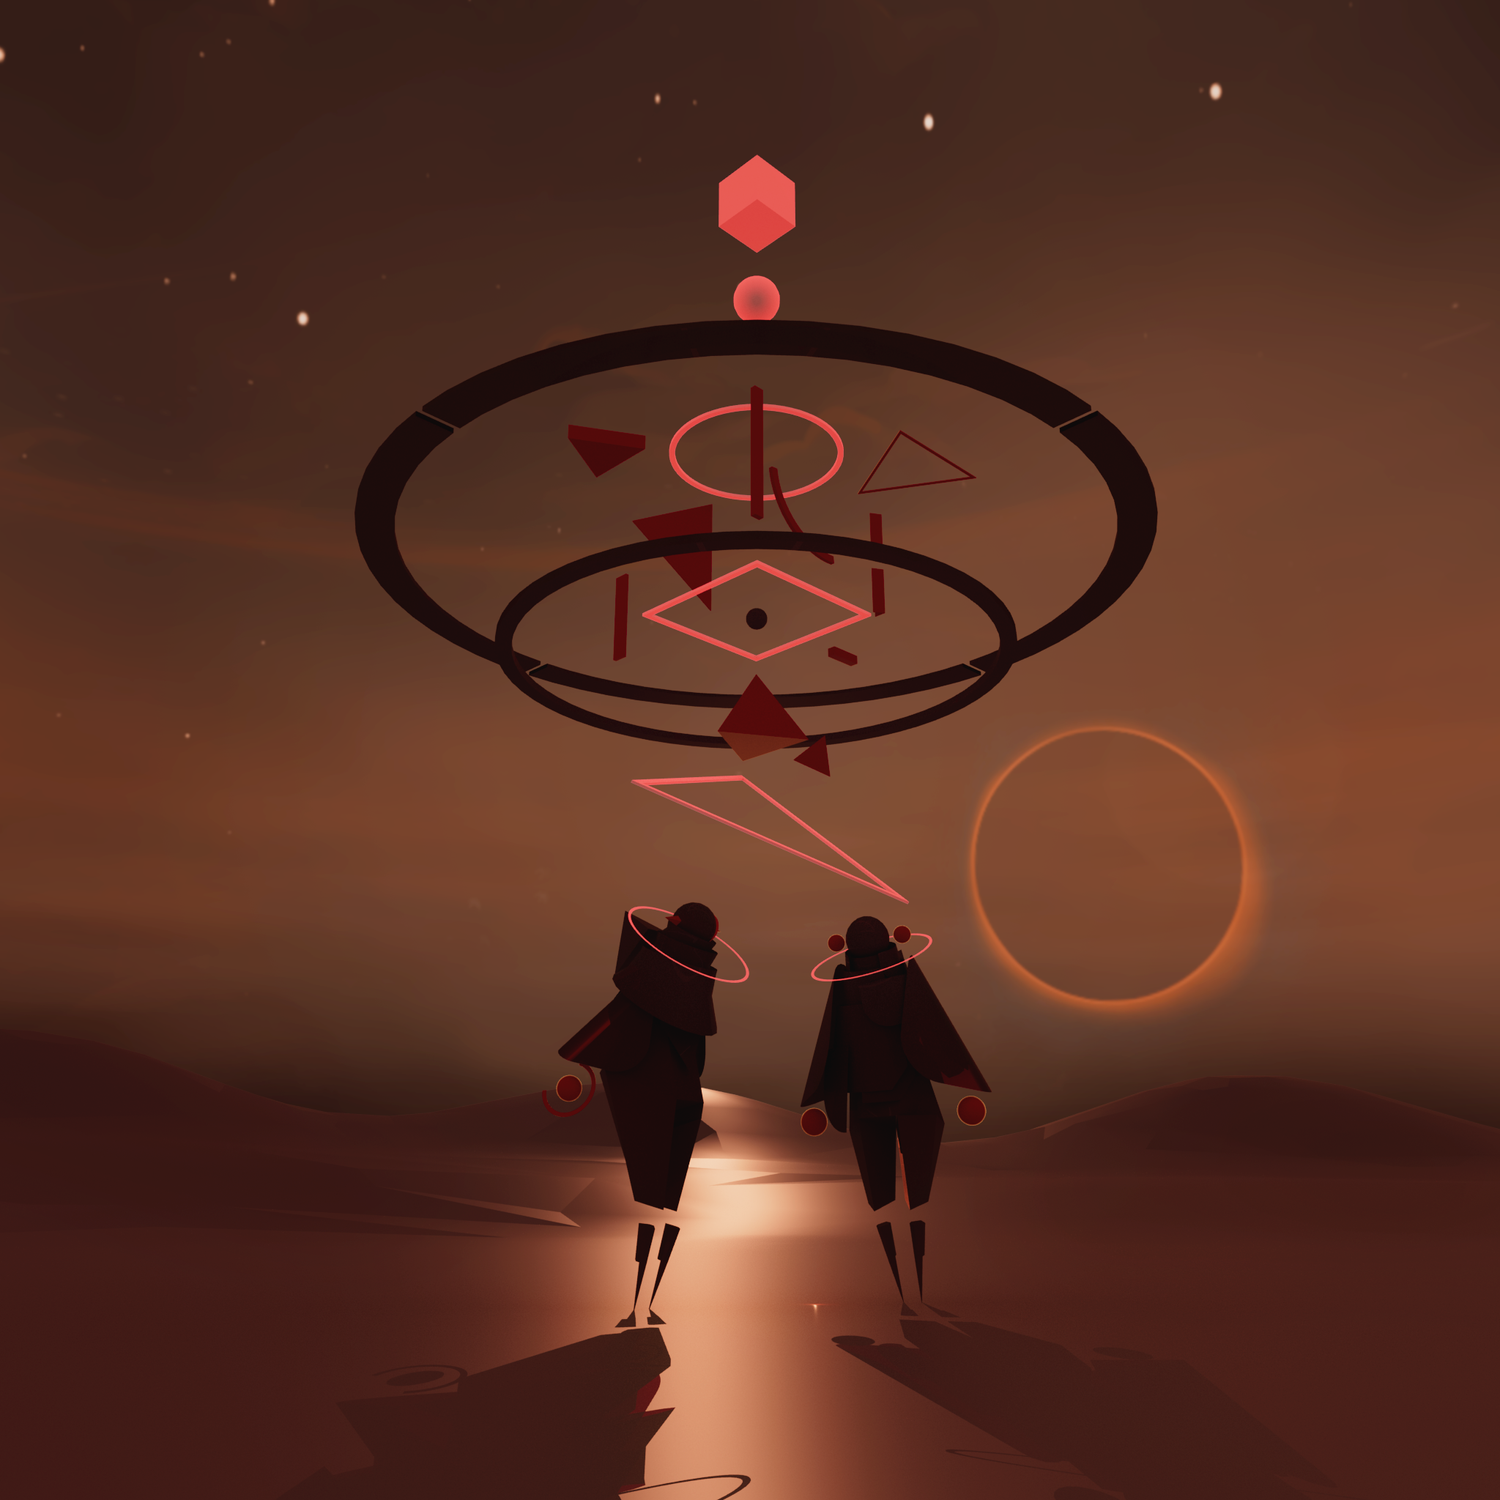 Two shadowy figures look out at a series of geometric shapes floating in the sky. It is dark and the environment is similar to a dessert.